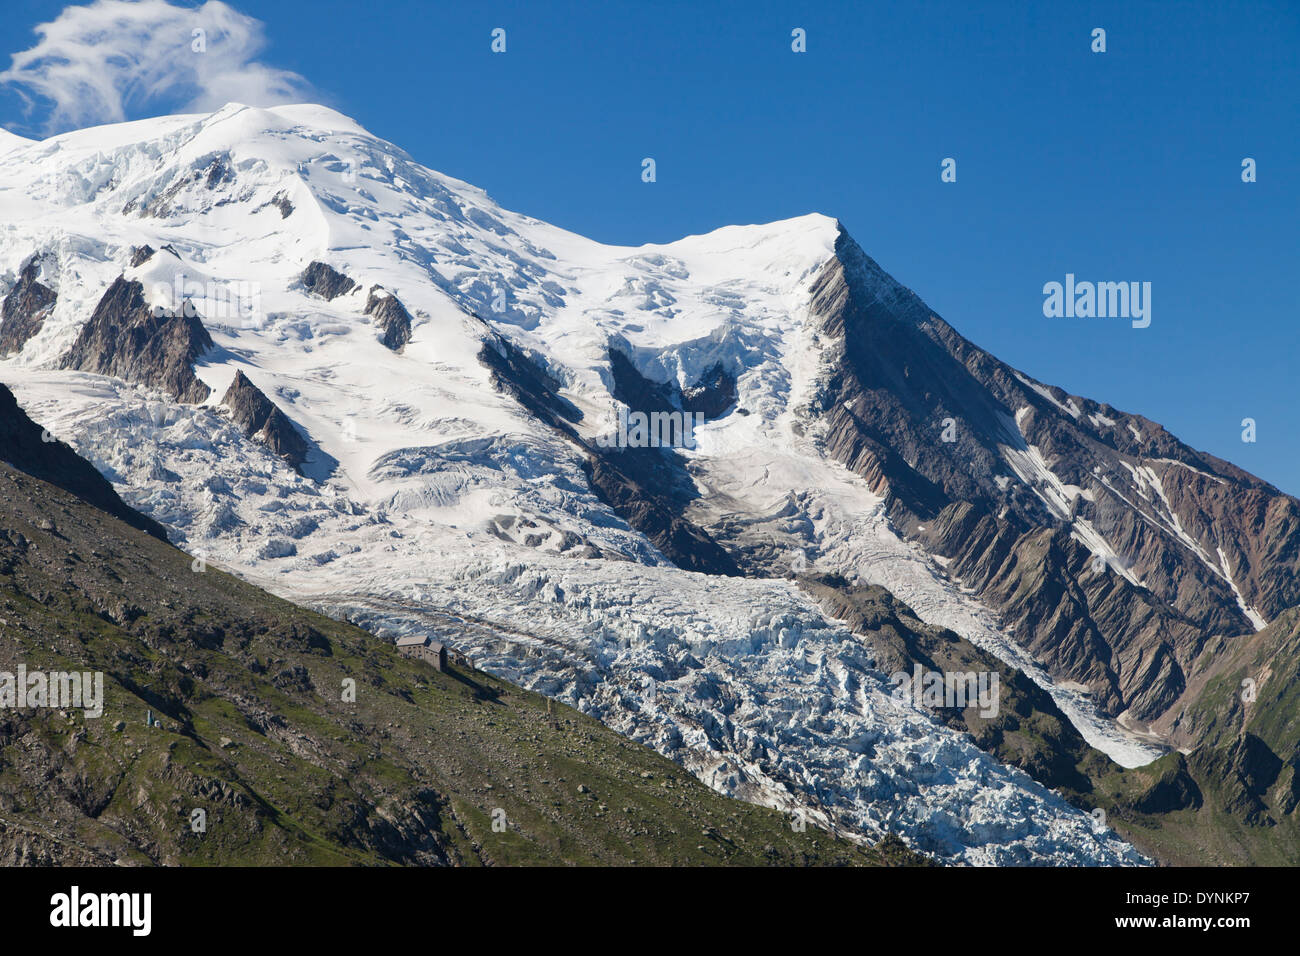 Dome and Aiguille du Gouter and Bossons Glacier in the French Alps. Stock Photo